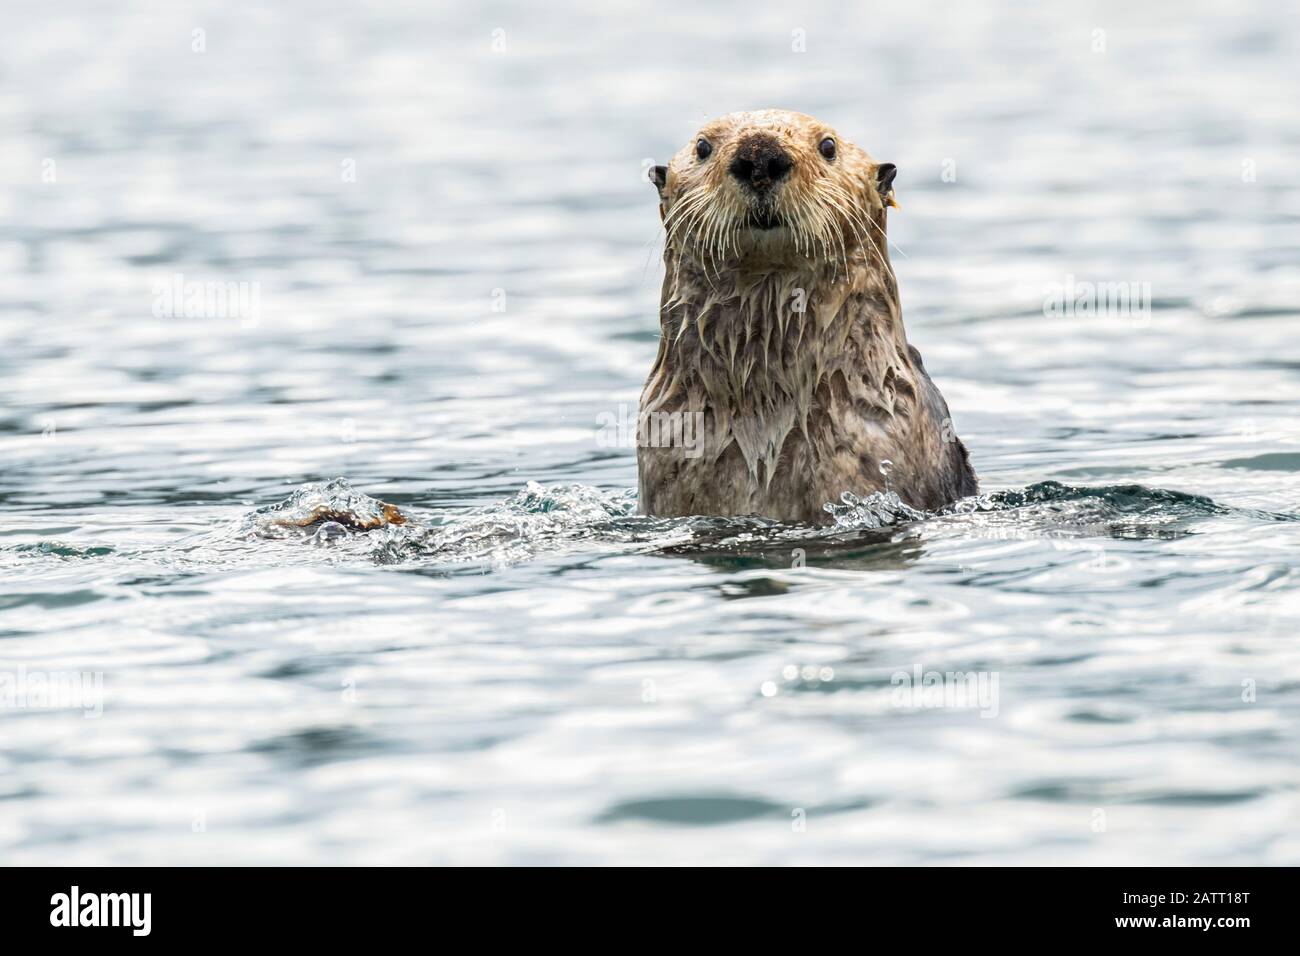 Sea otter (Enhydra lutris) checking out the photographer; Alaska, United States of America Stock Photo